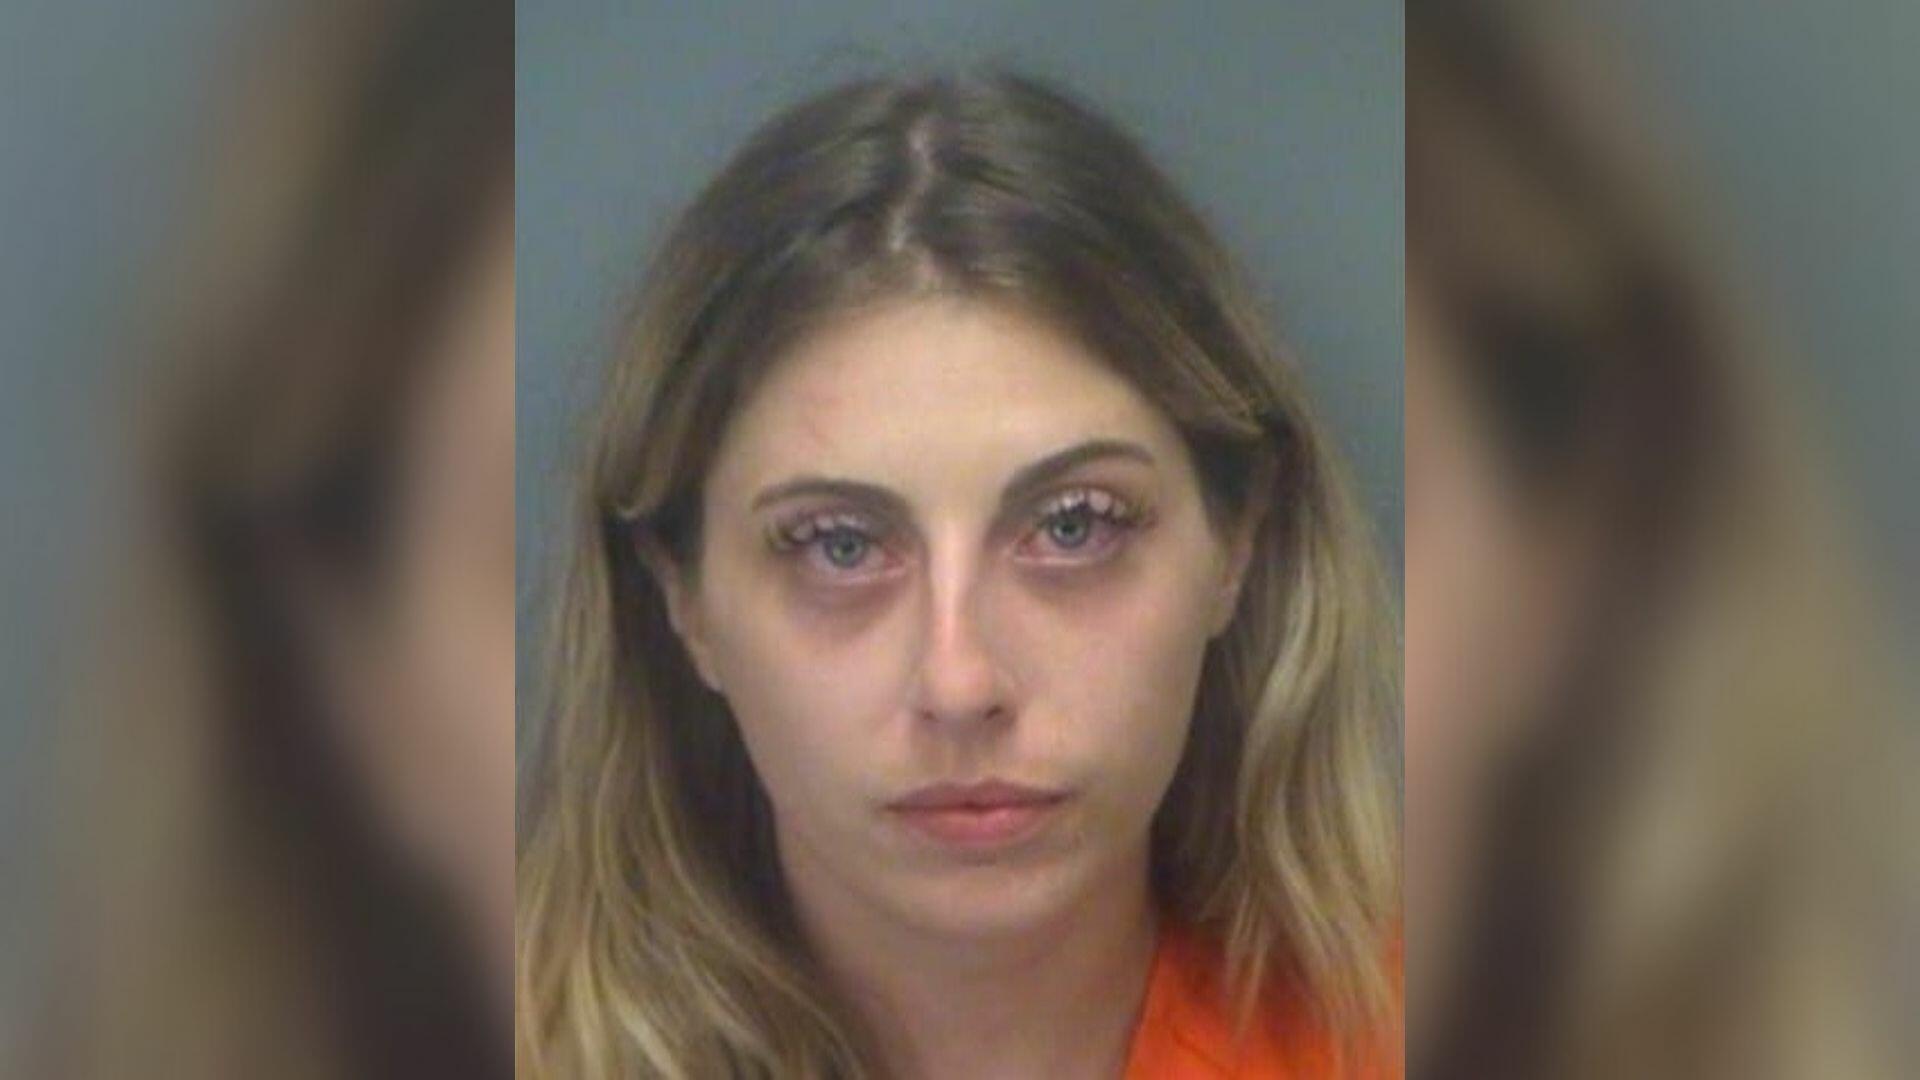 Naked Woman Pulls Up In A Golf Cart During Armed Standoff In Florida